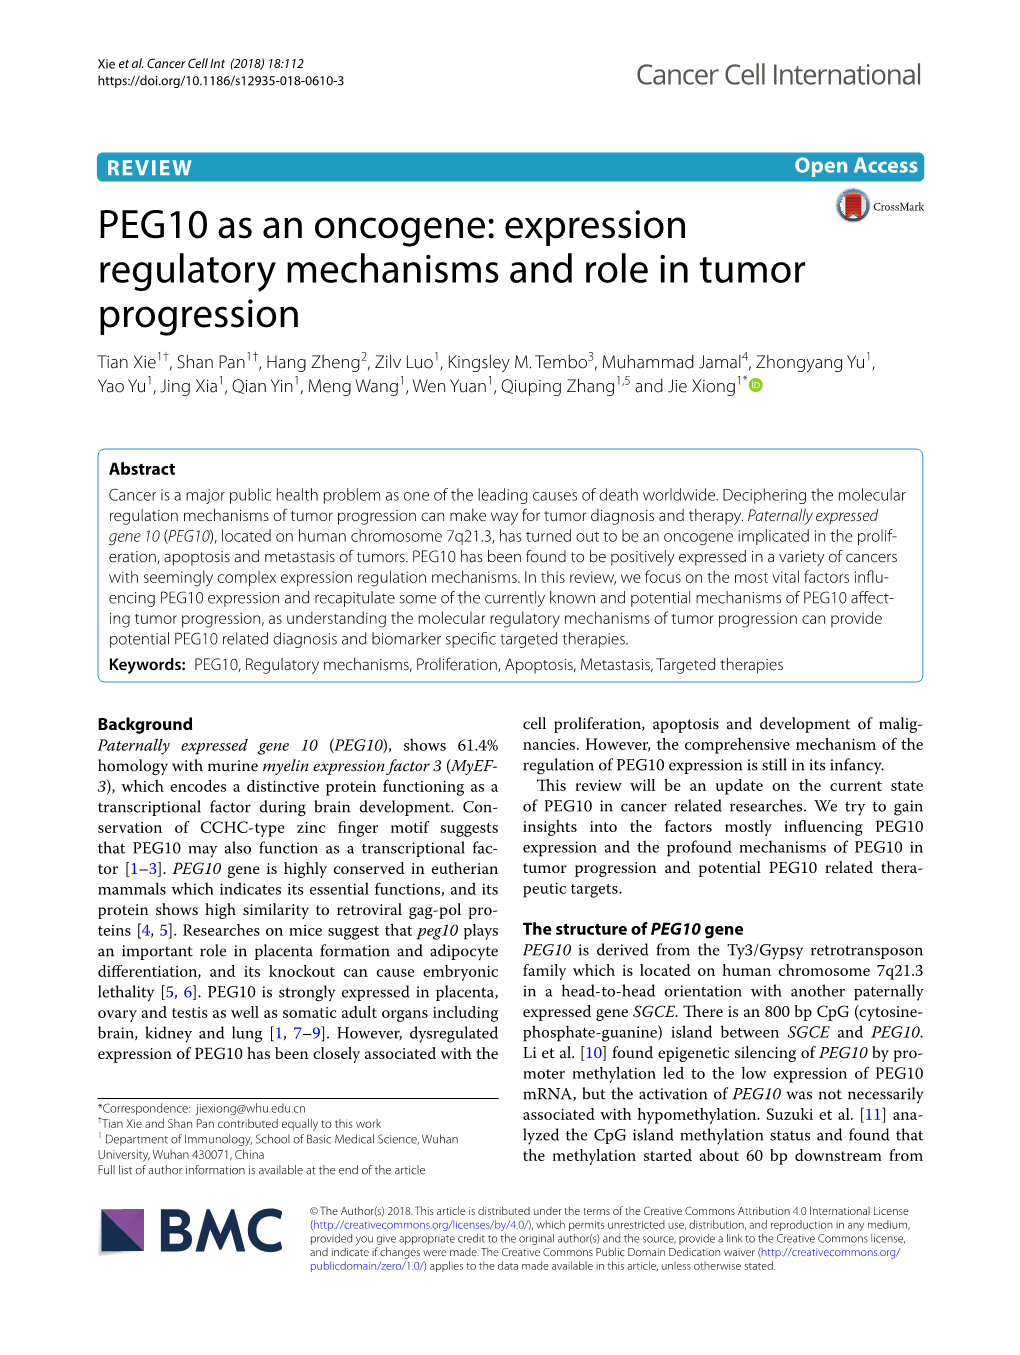 PEG10 As an Oncogene: Expression Regulatory Mechanisms and Role in Tumor Progression Tian Xie1†, Shan Pan1†, Hang Zheng2, Zilv Luo1, Kingsley M